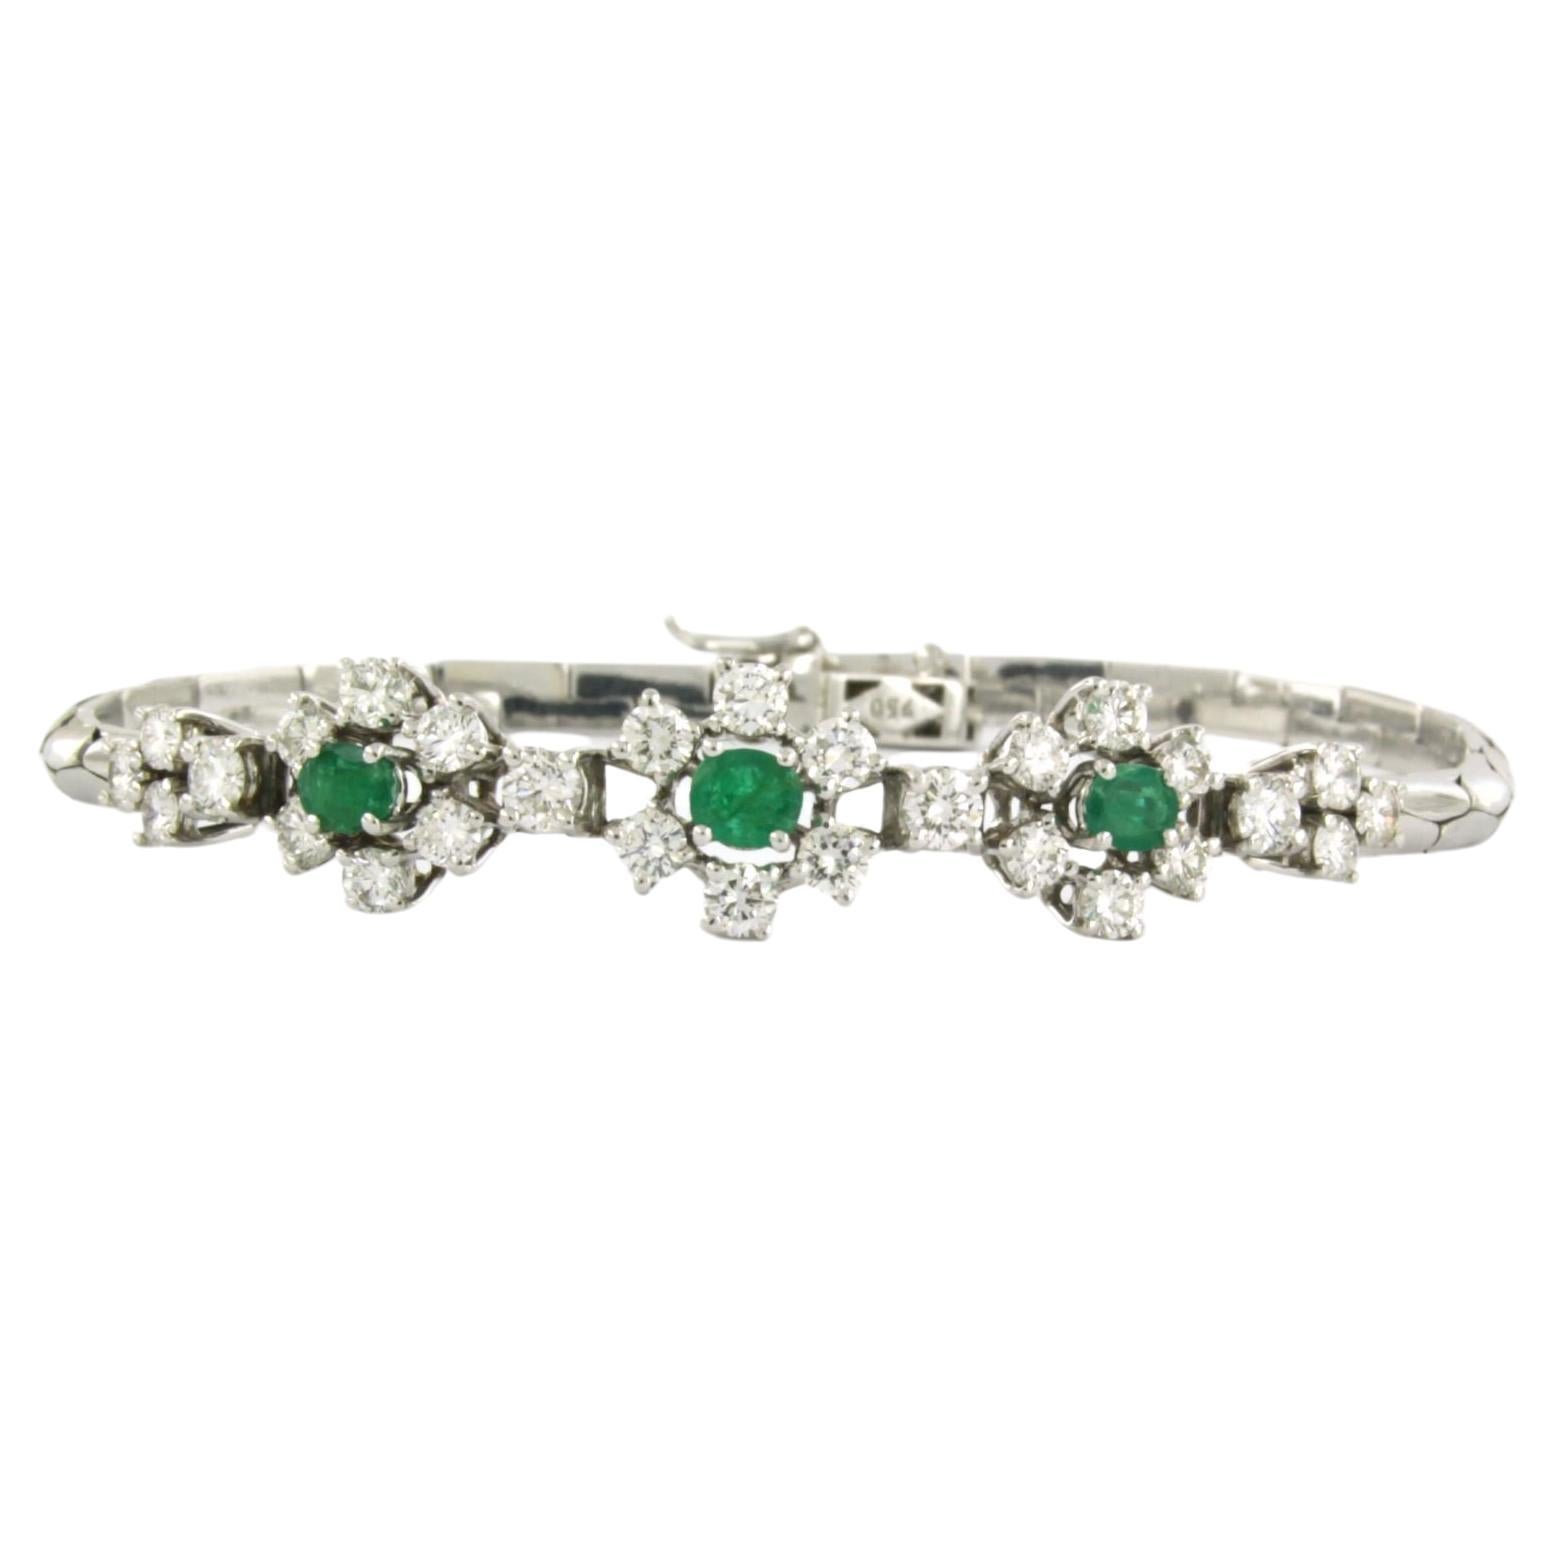 Bracelet with emerald and diamonds 18k white gold